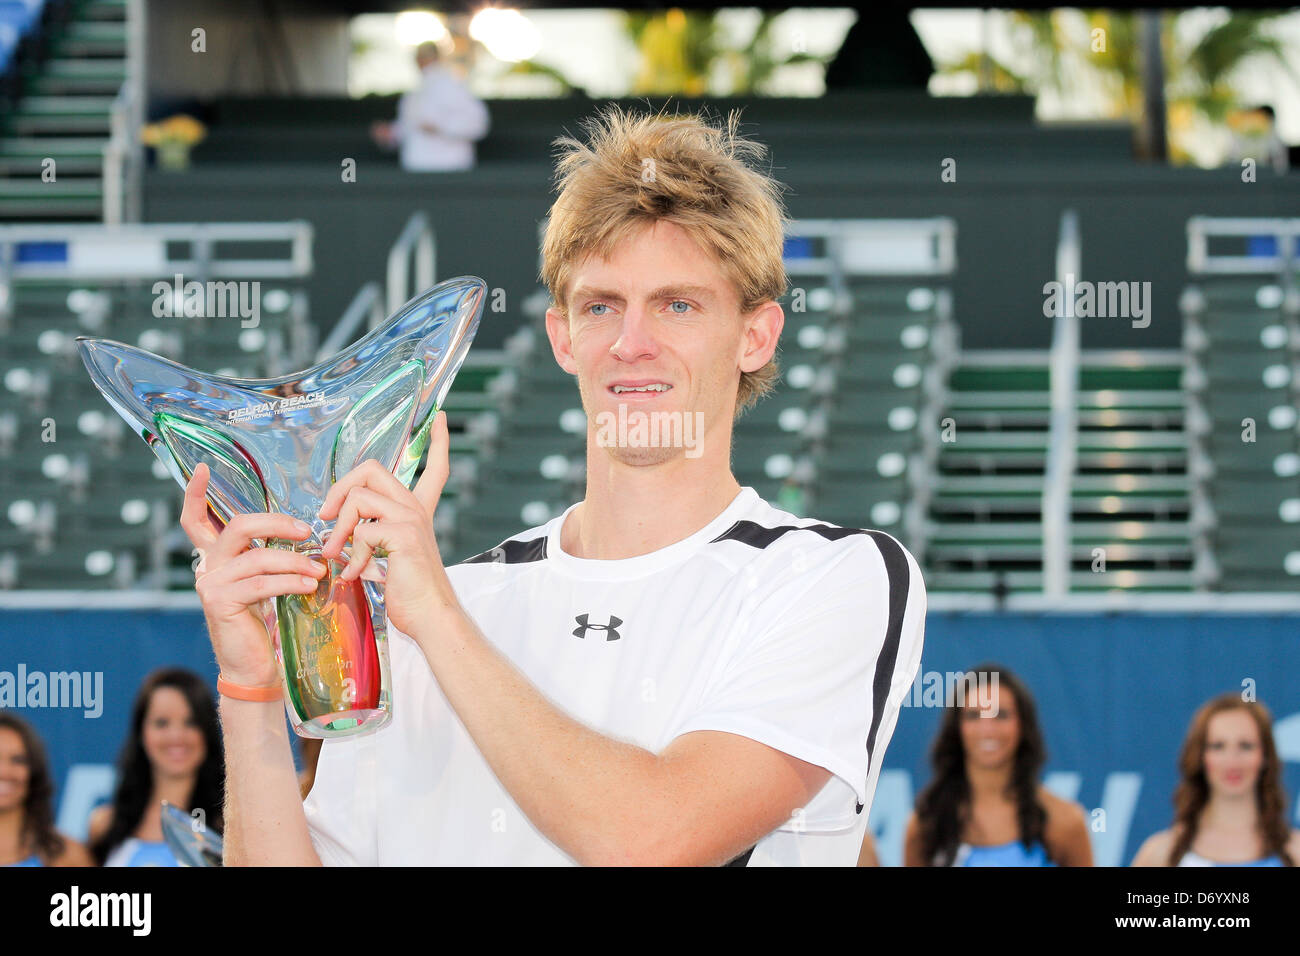 Kevin Anderson bat Marinko Bey à l'Delray Beach International Tennis Championships Delray Beach, Floride - Banque D'Images